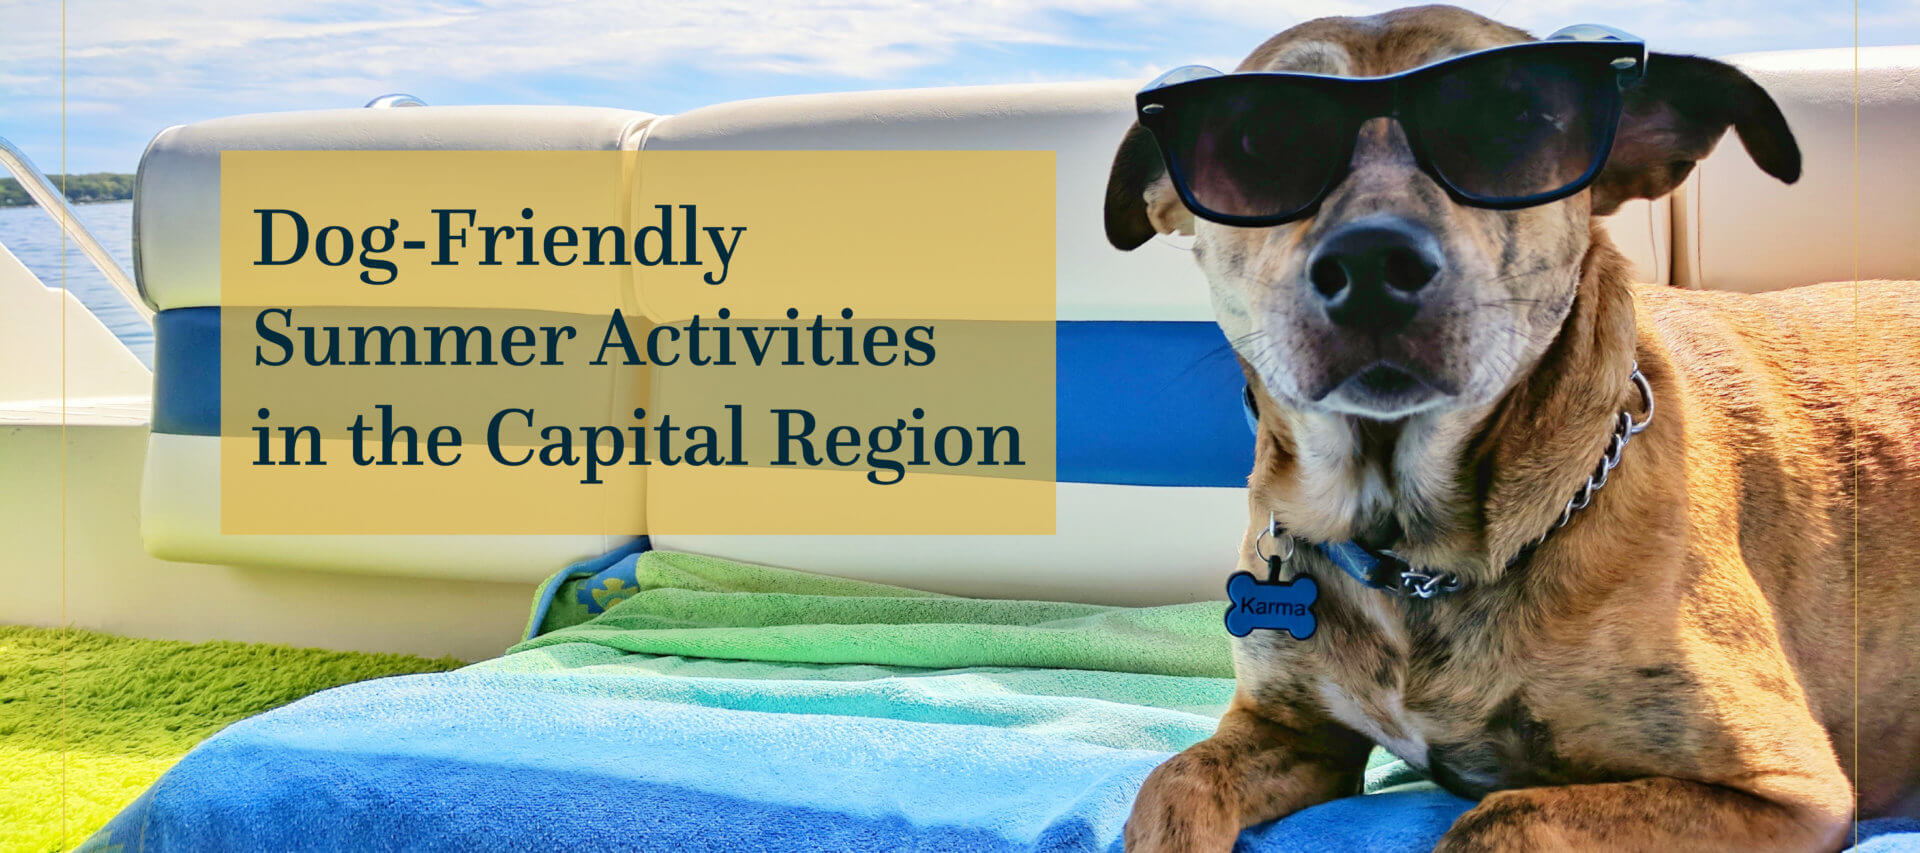 Dog-Friendly Summer Activities in the Capital Region